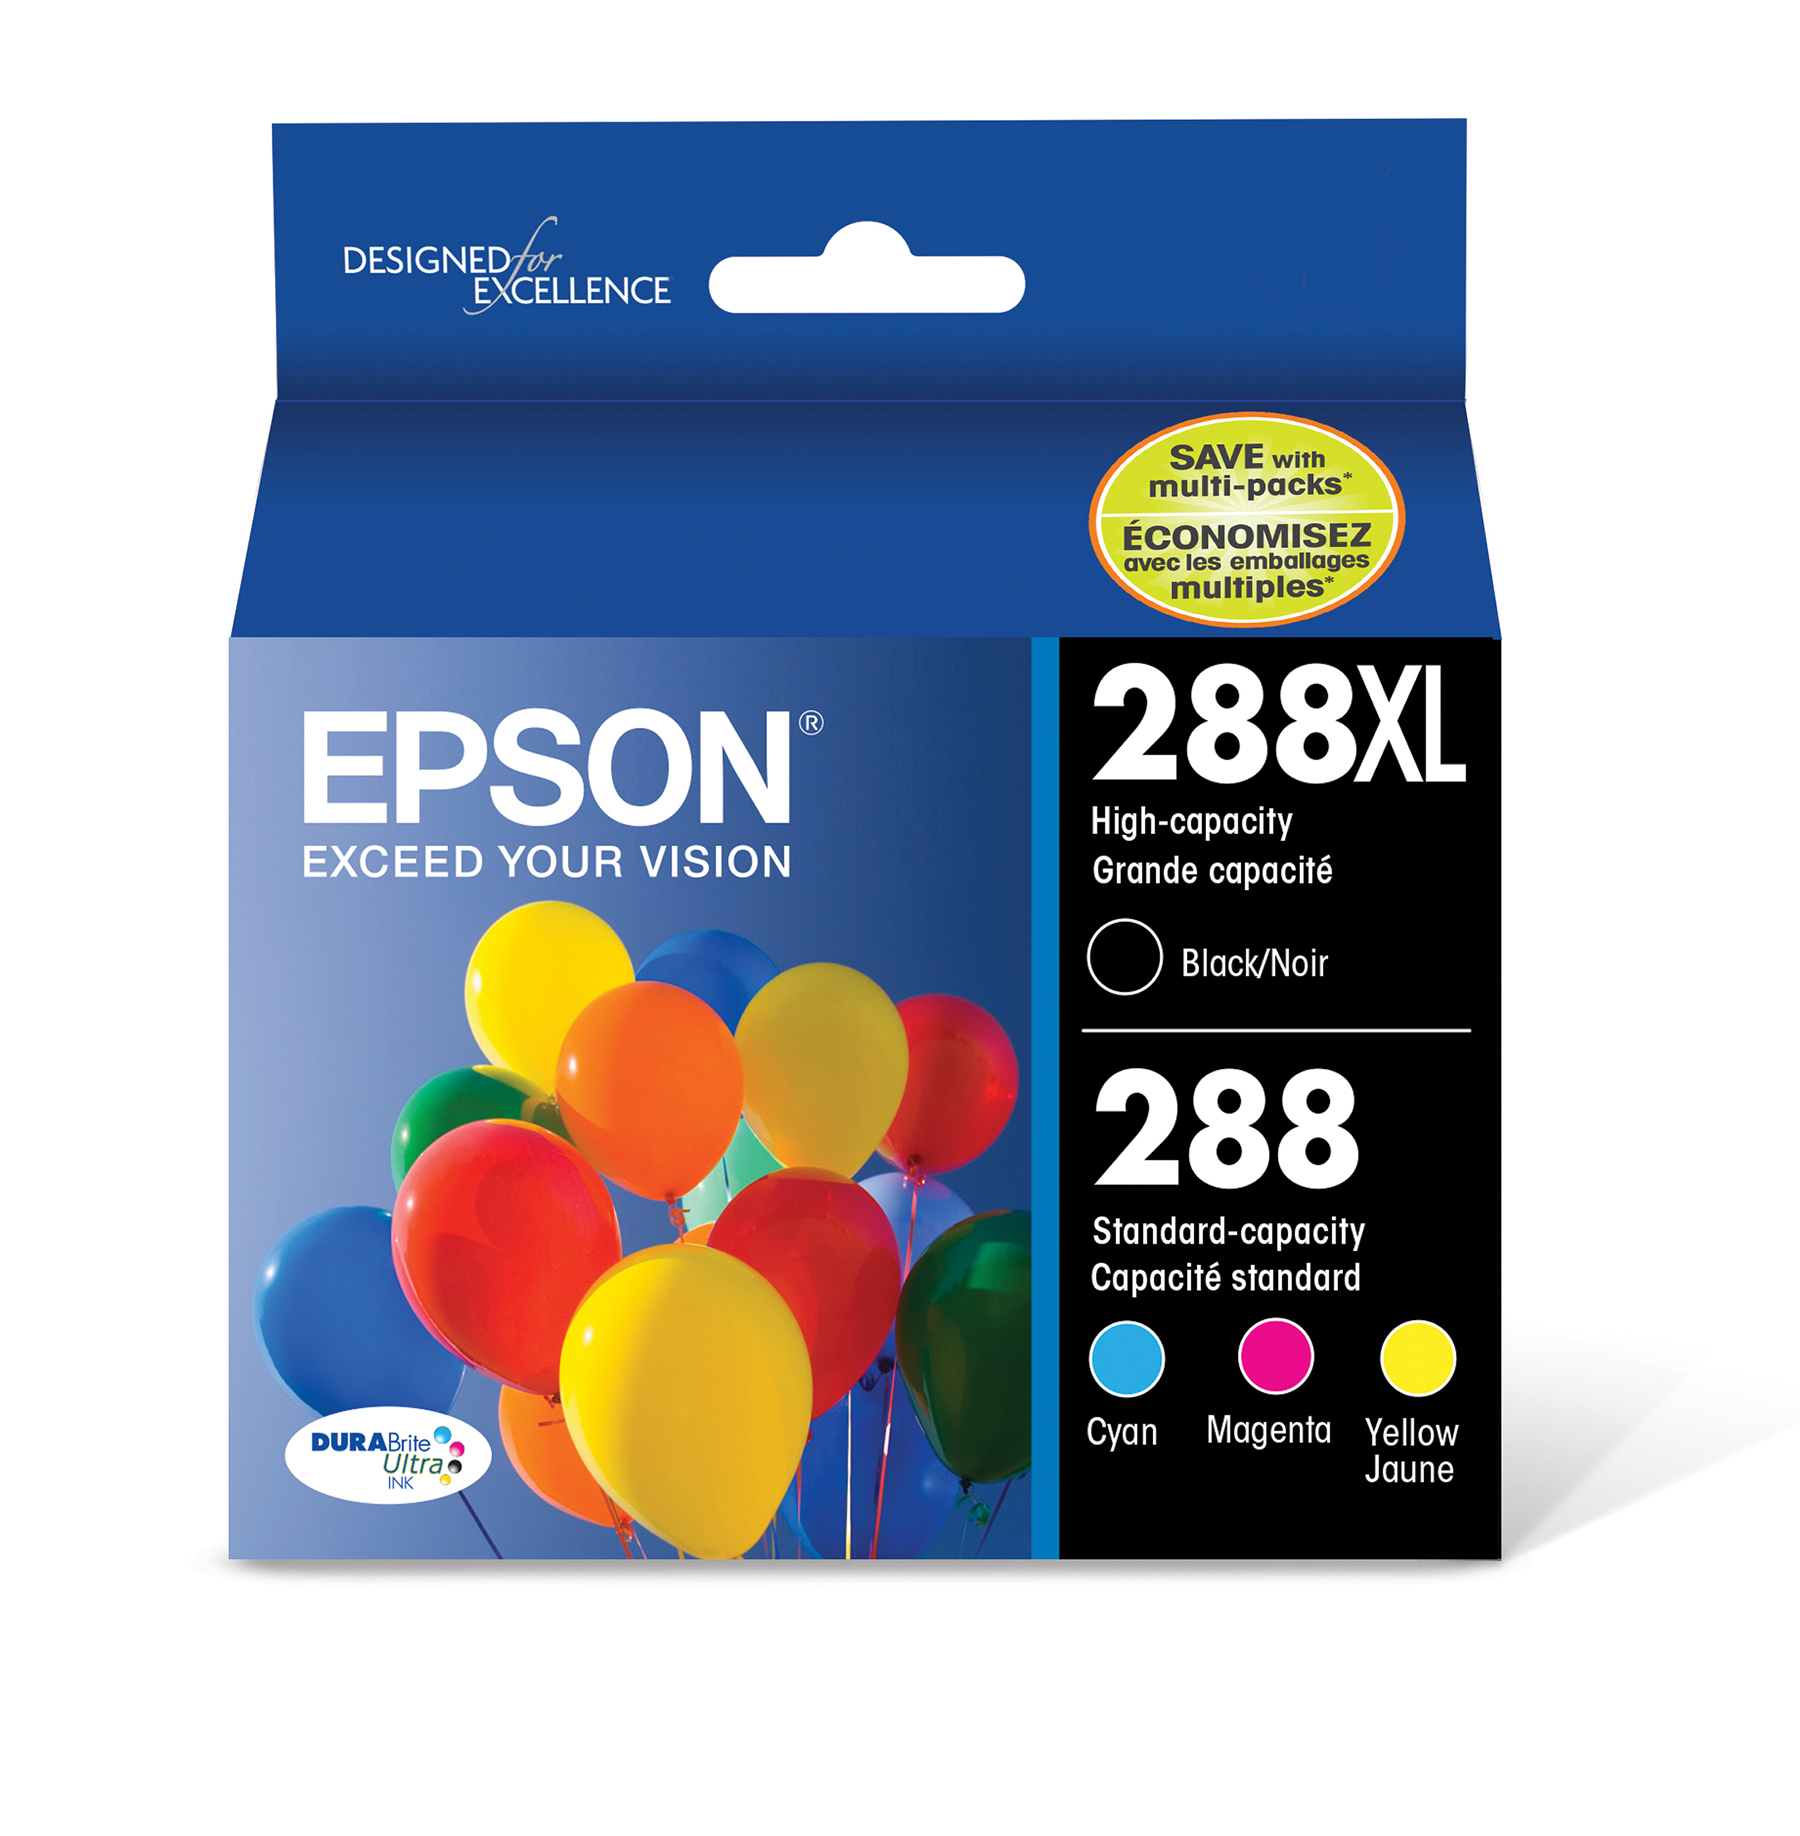 EPSON 288 DURABrite Ultra Ink High Capacity Black & Standard Color Cartridge Combo Pack (T288XL-BCS) Works with Expression XP-330, XP-430, XP-434, XP-340, XP-440, XP-446 - image 1 of 5